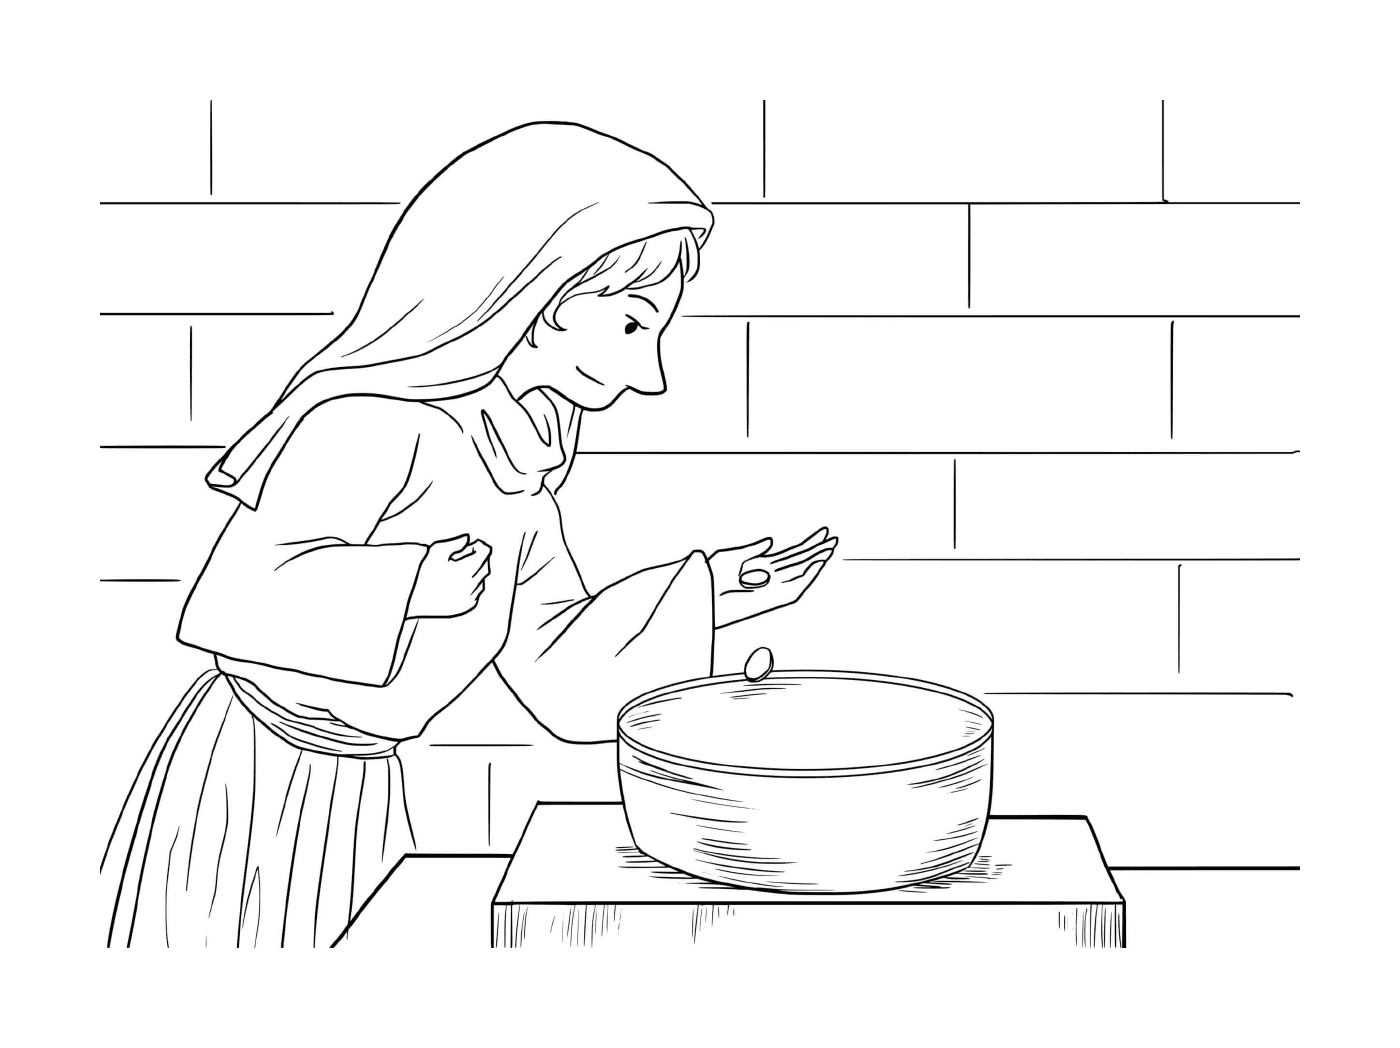  Woman standing next to a bowl 